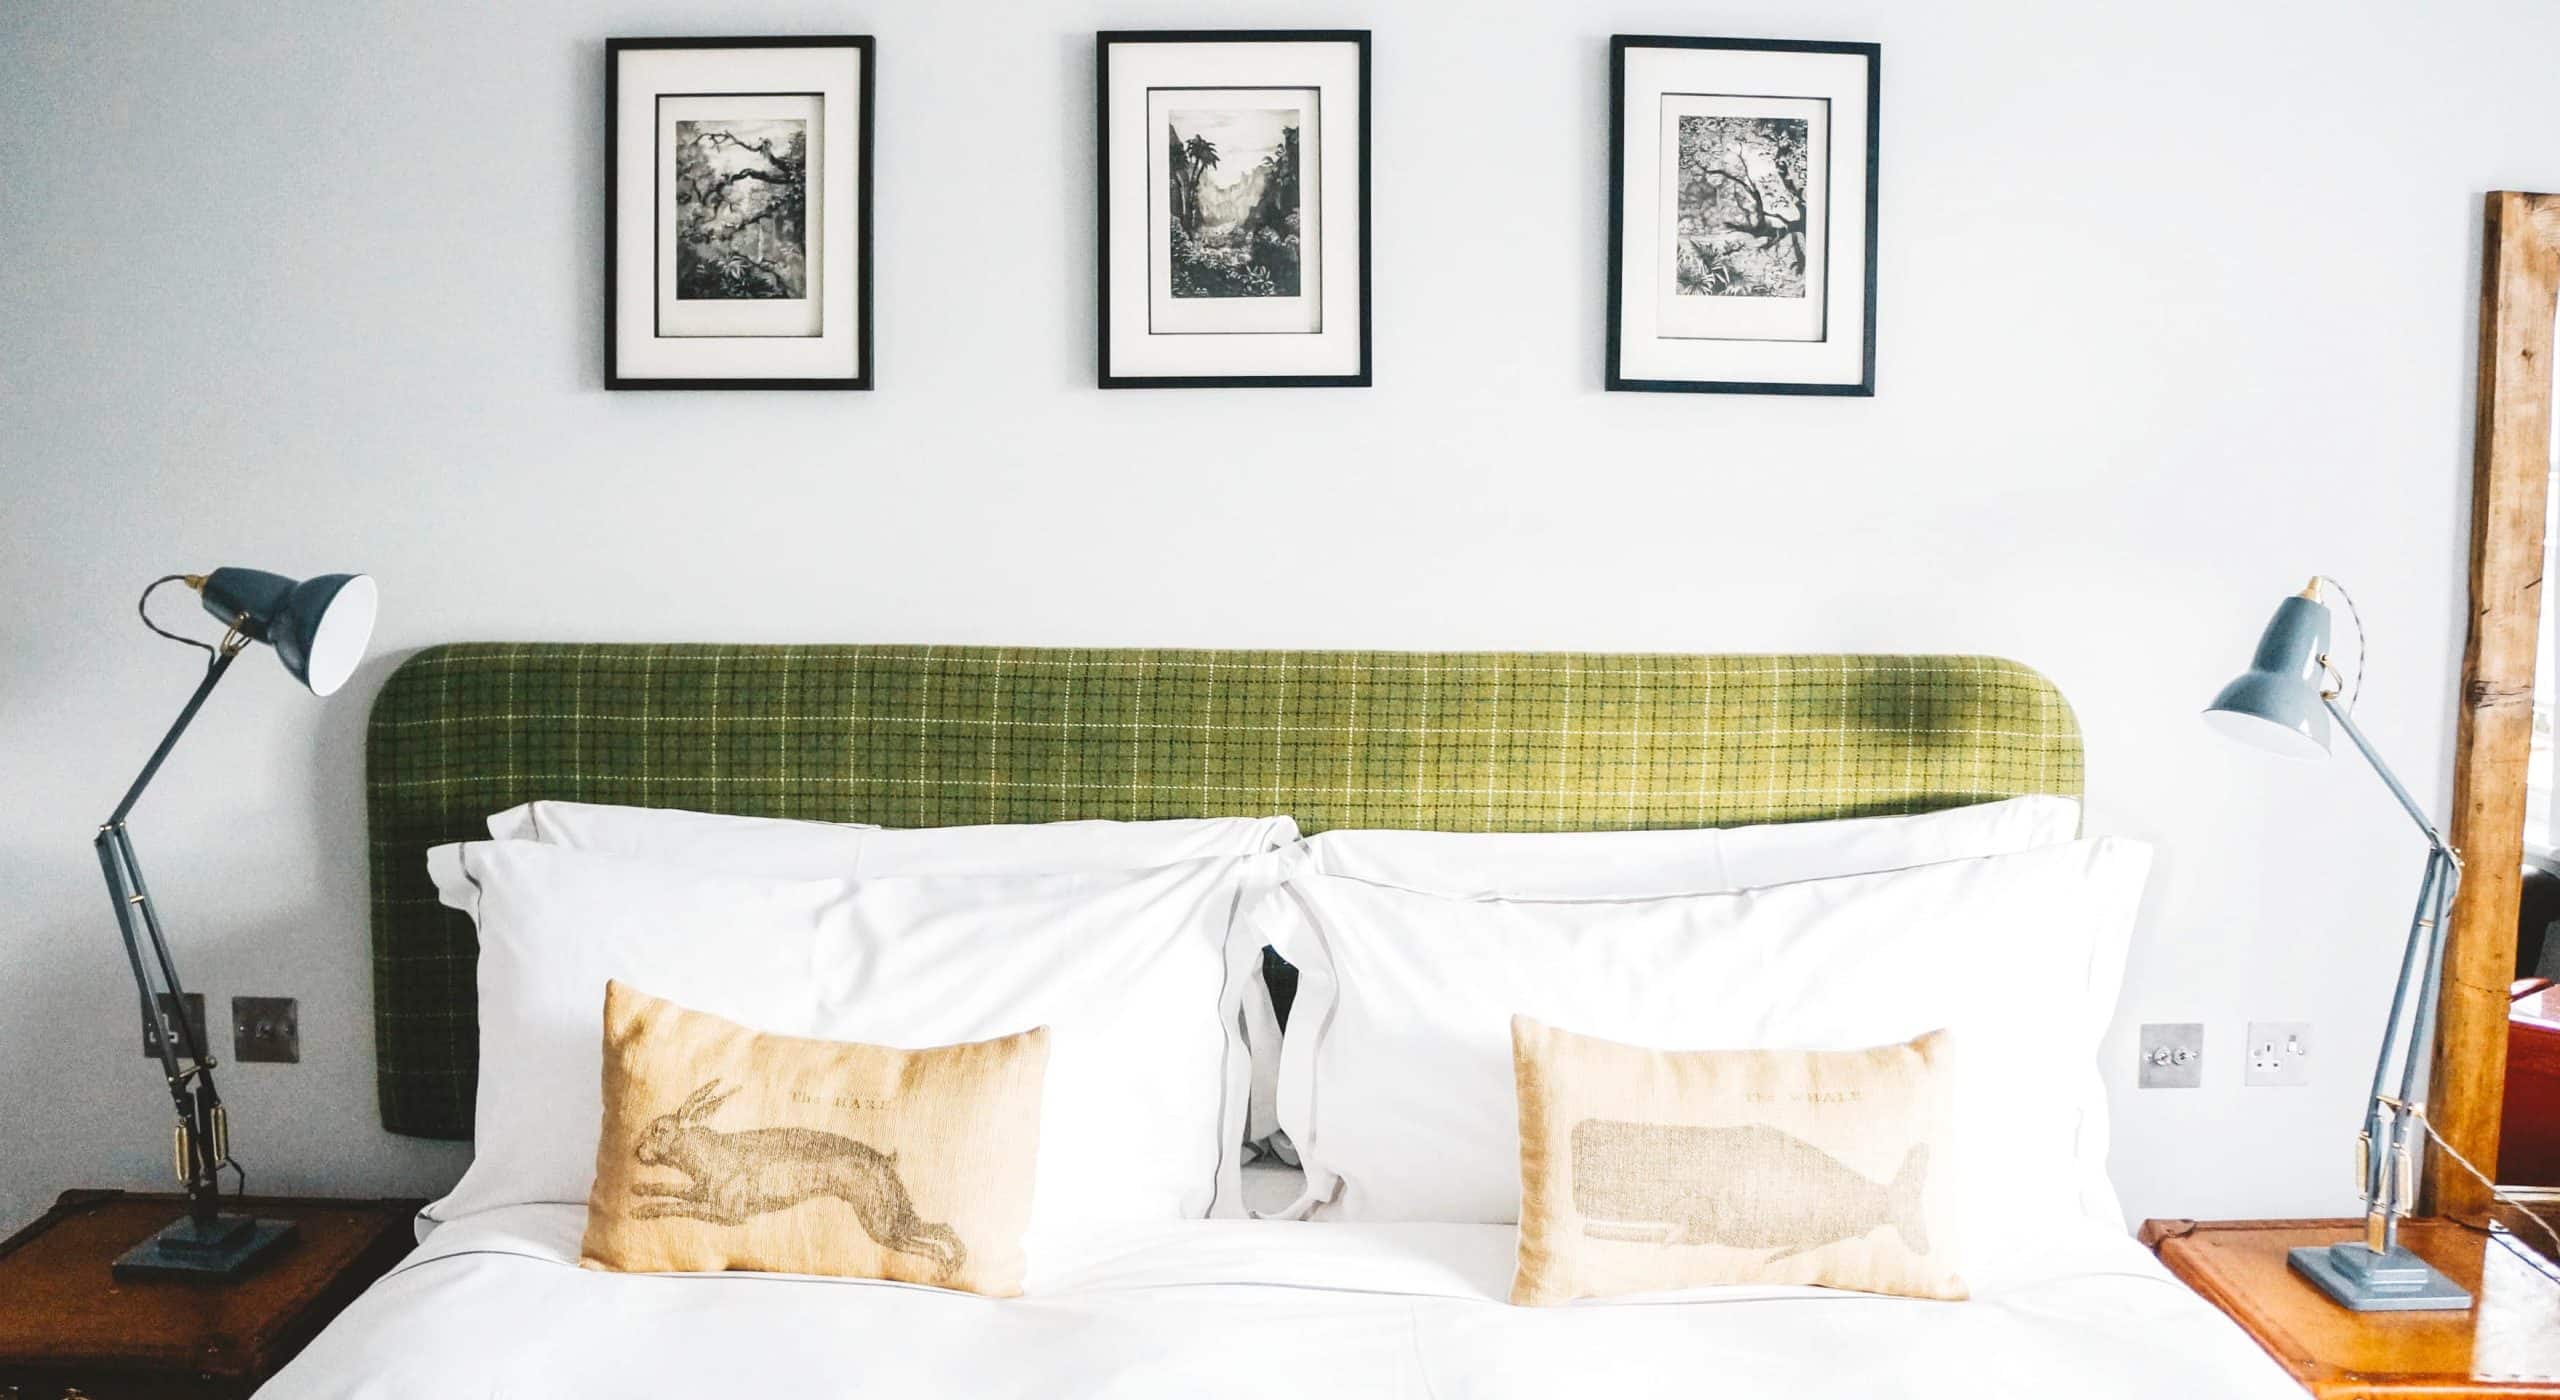 Want to know how to make your home feel like a boutique hotel? From hotel quality pillows to luxury bath toiletries, here are the top five things you need.